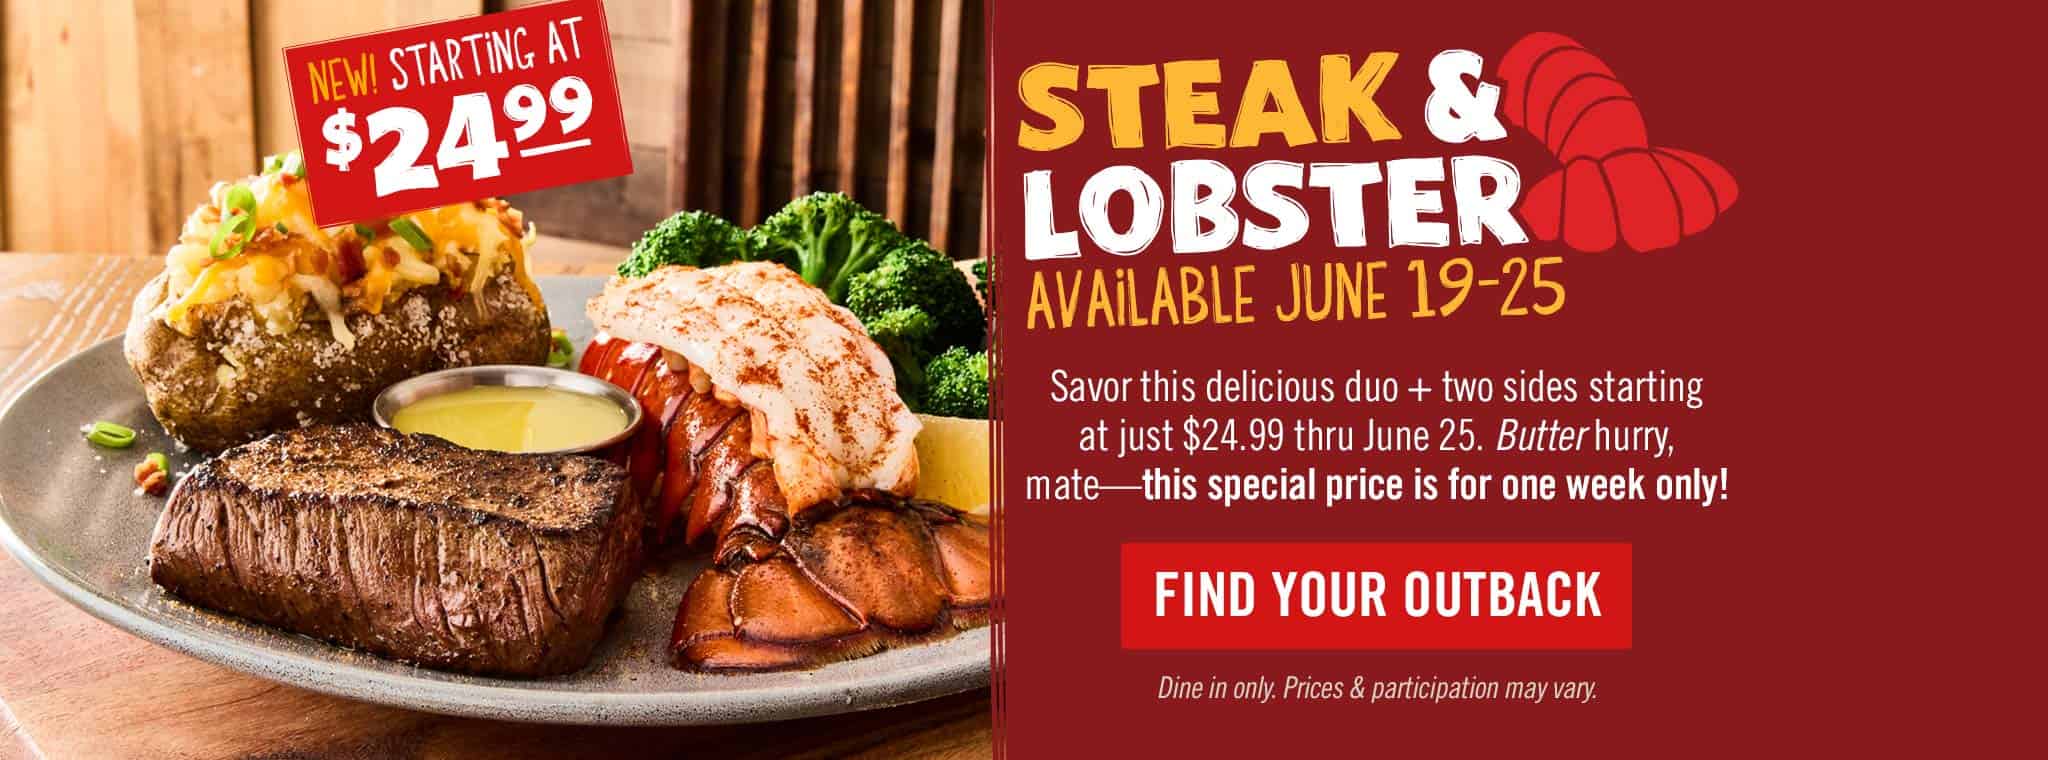 Enjoy steak & lobster special at Outback Steakhouse for one week only